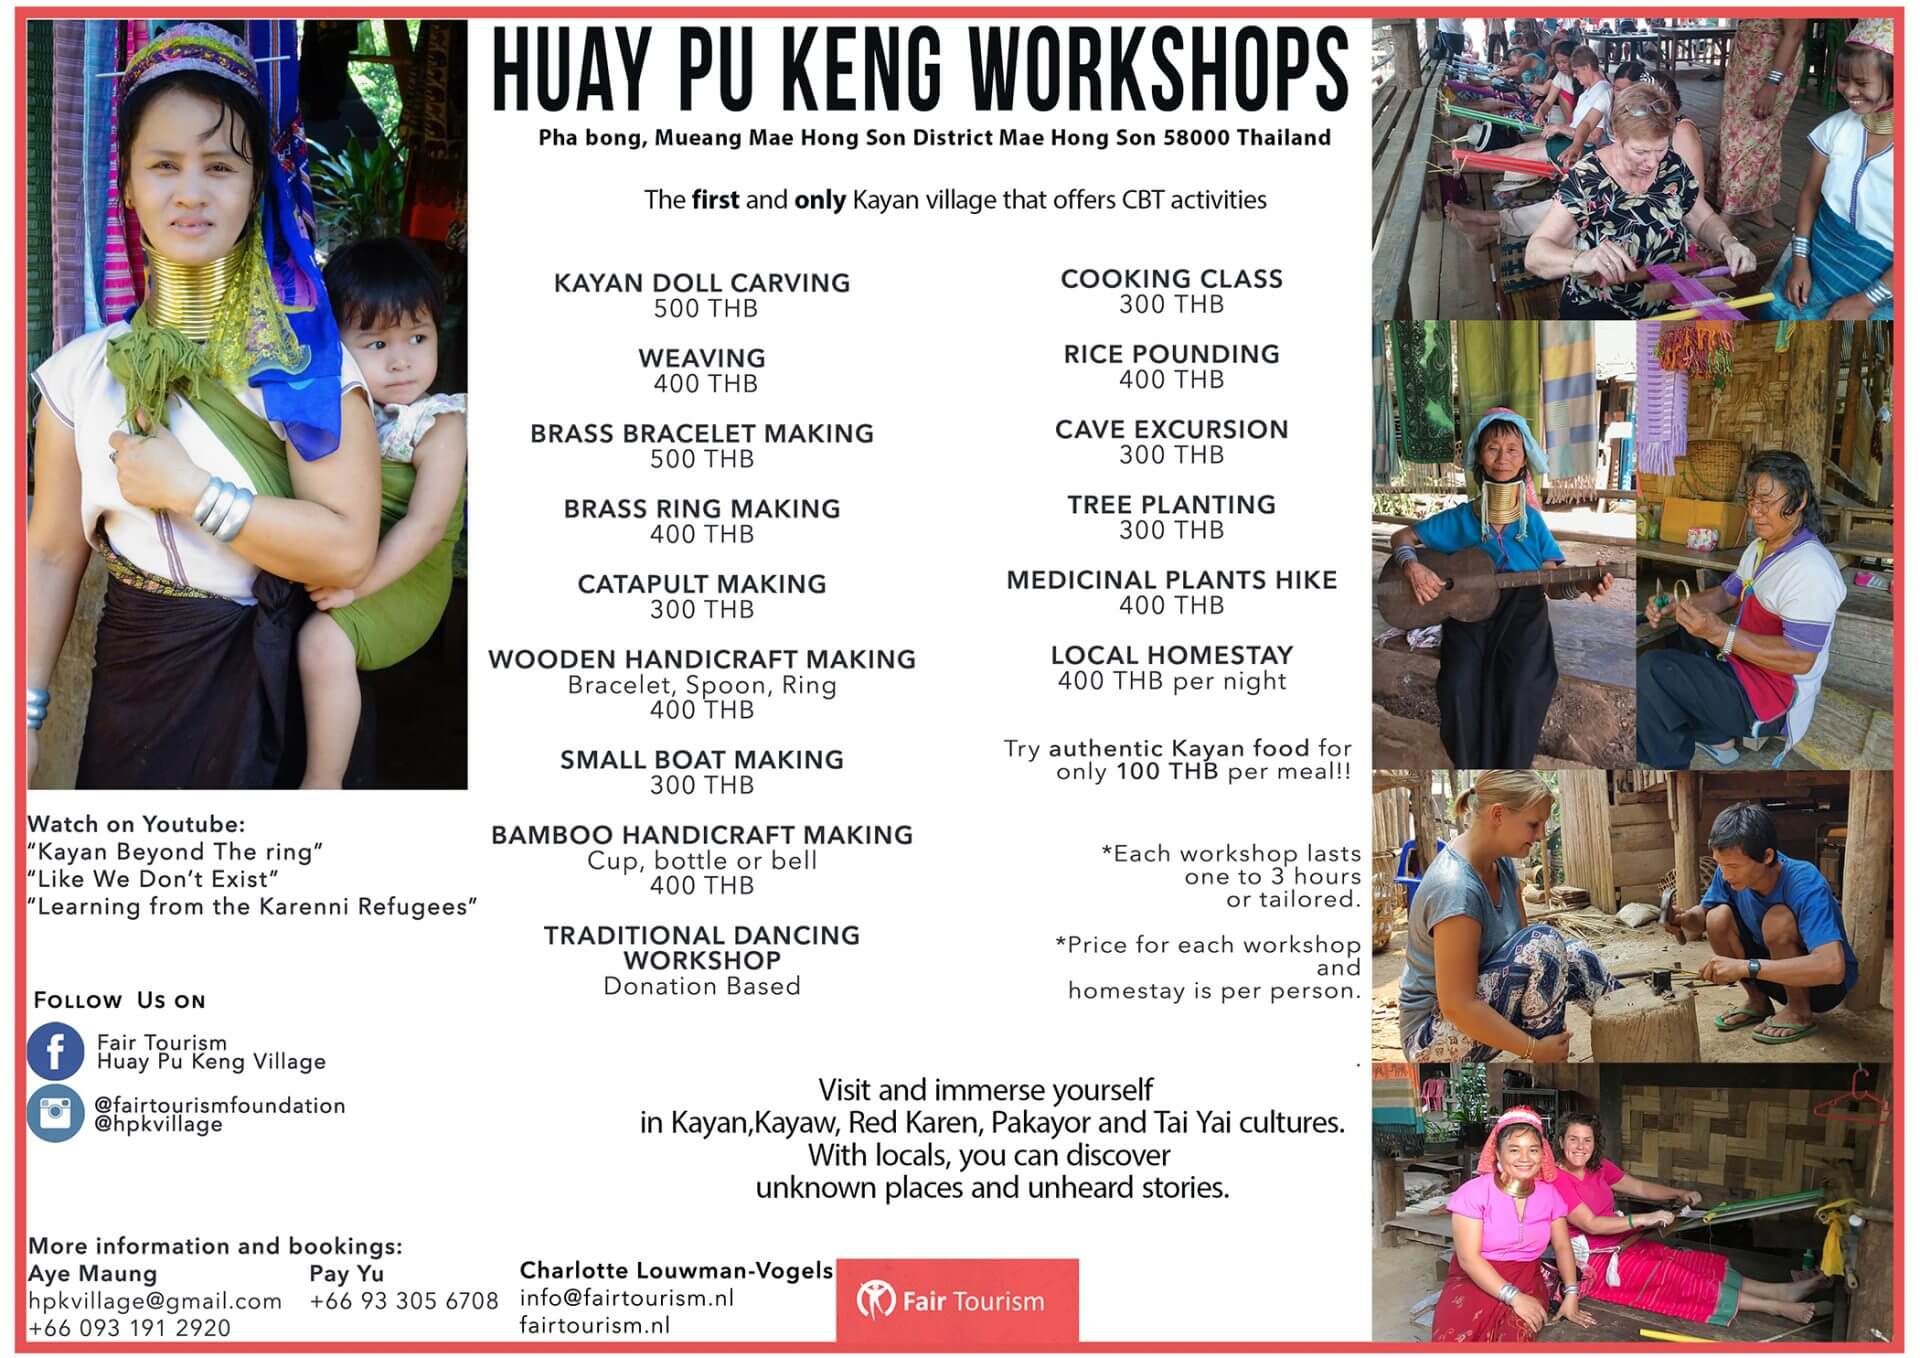 Workshops offered in Huay Pu Keng